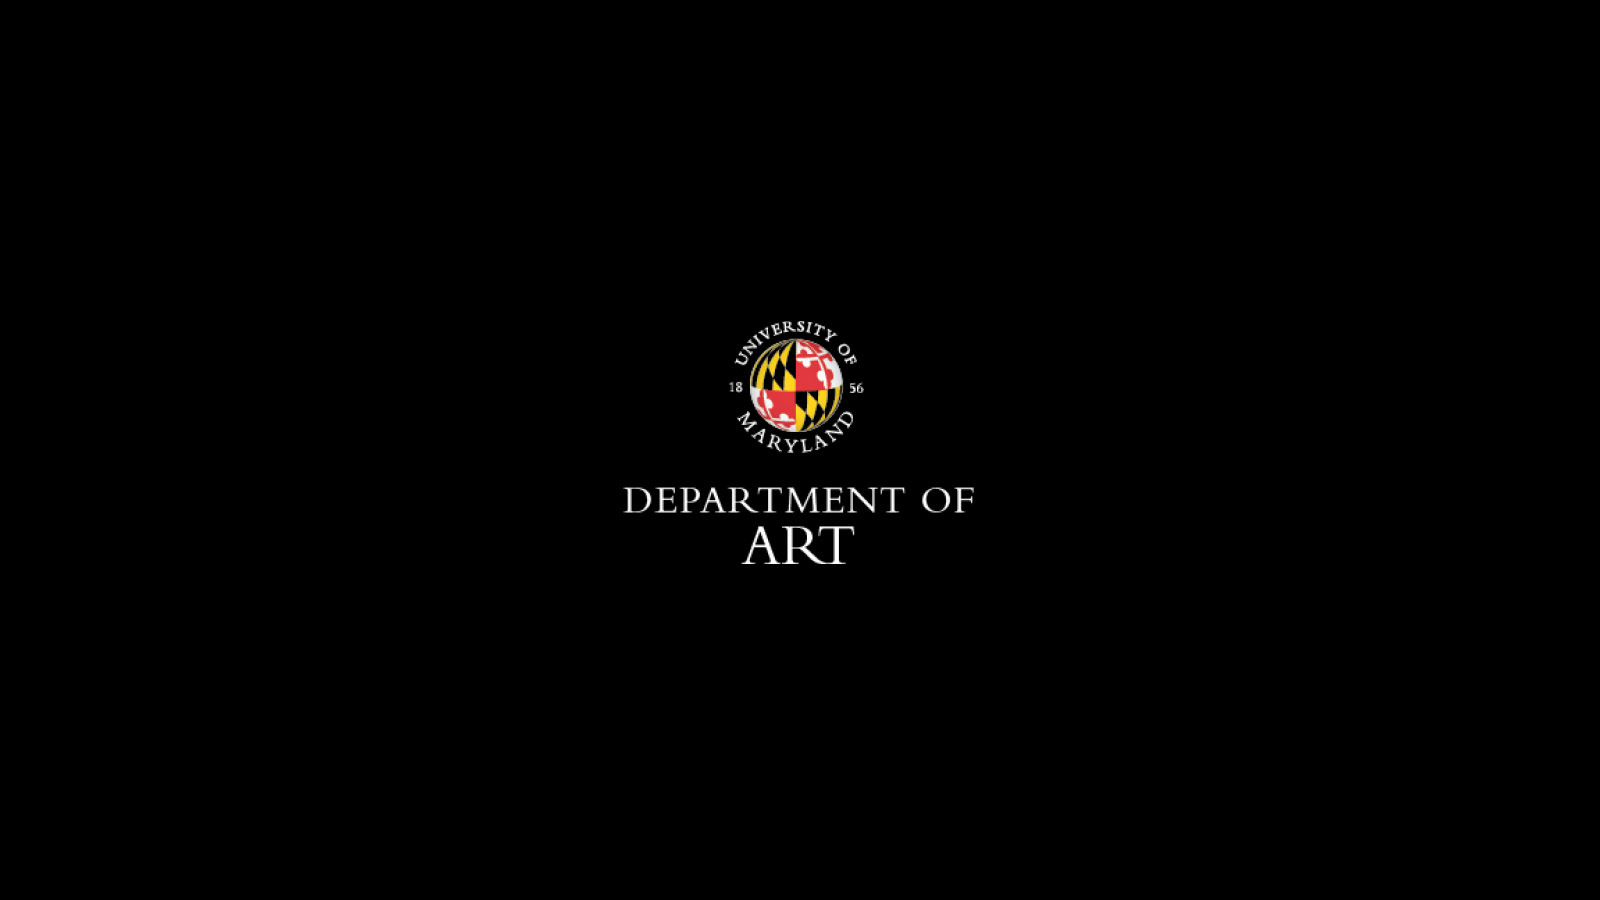 Department of Art default image with logo